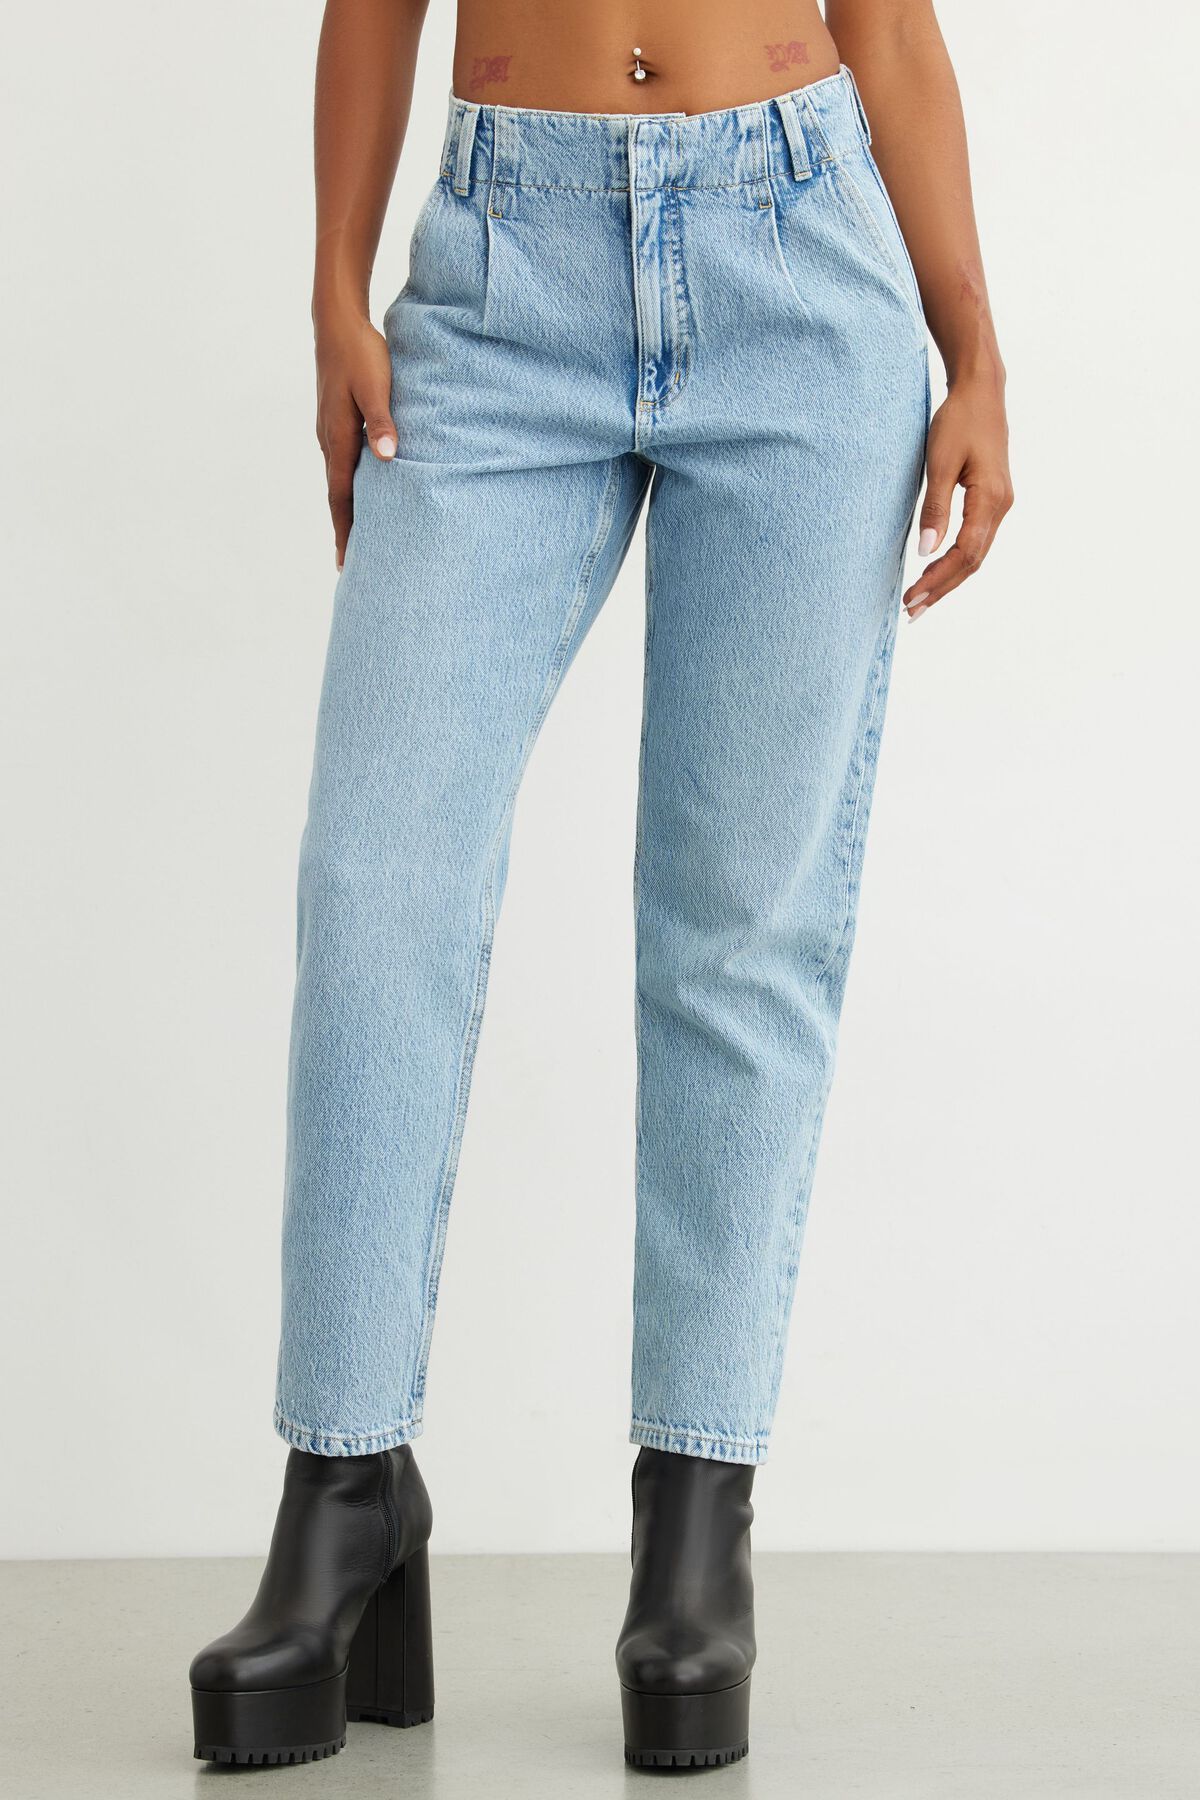 Dynamite Claudia High Waisted Pleated Jeans. 2